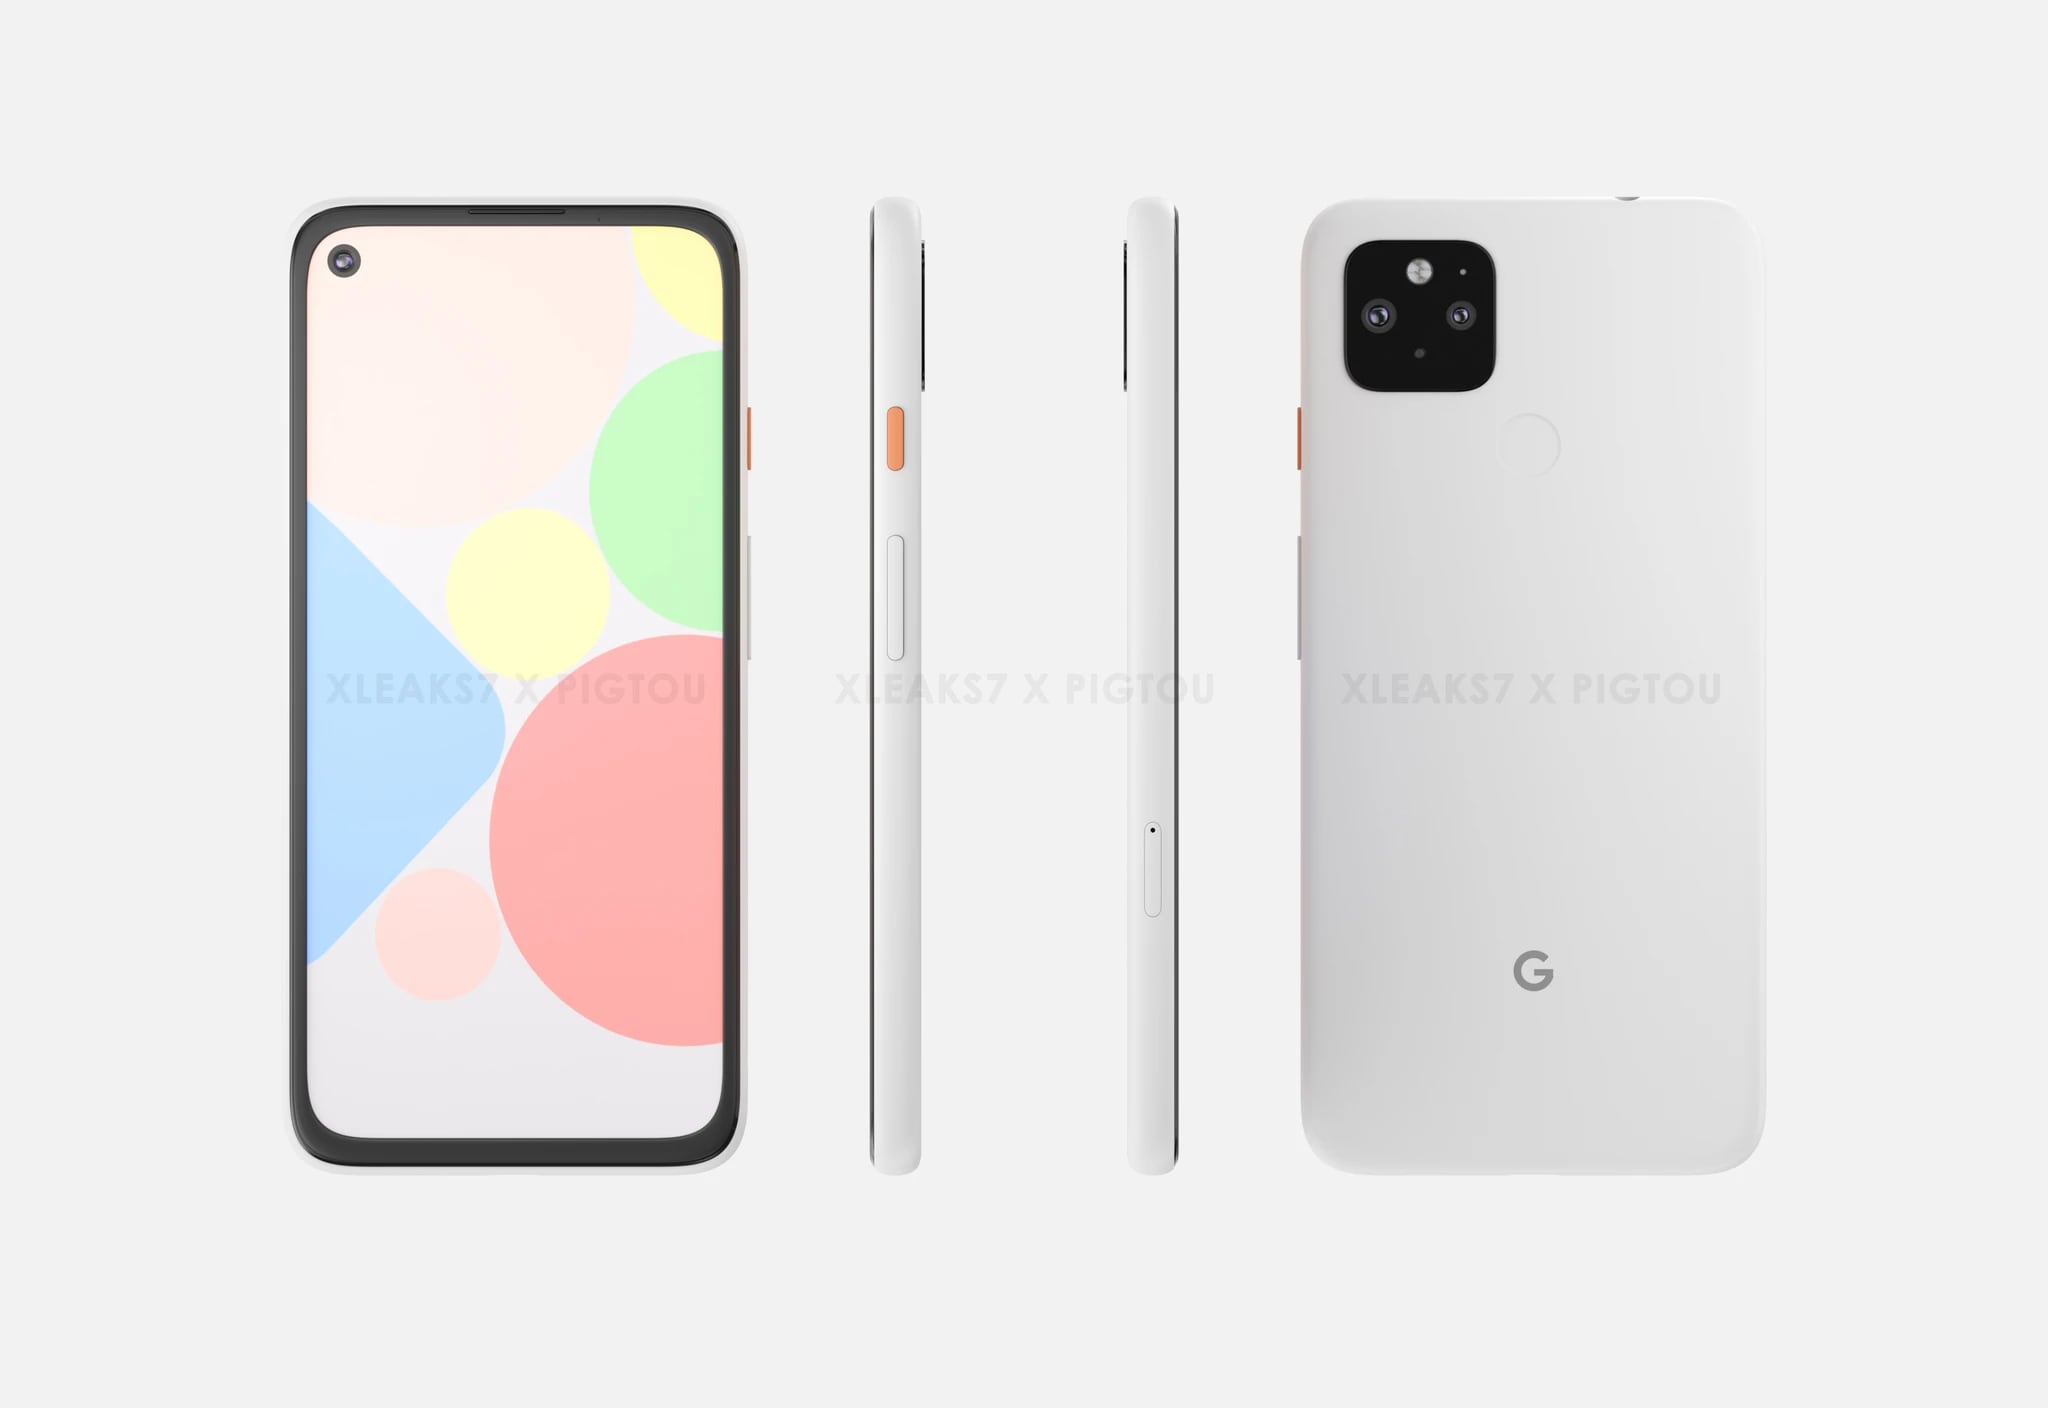 https://www.androidworld.it/wp-content/uploads/2020/05/Google_Pixel_4a_XL_front_back_sides_2048x2048.png